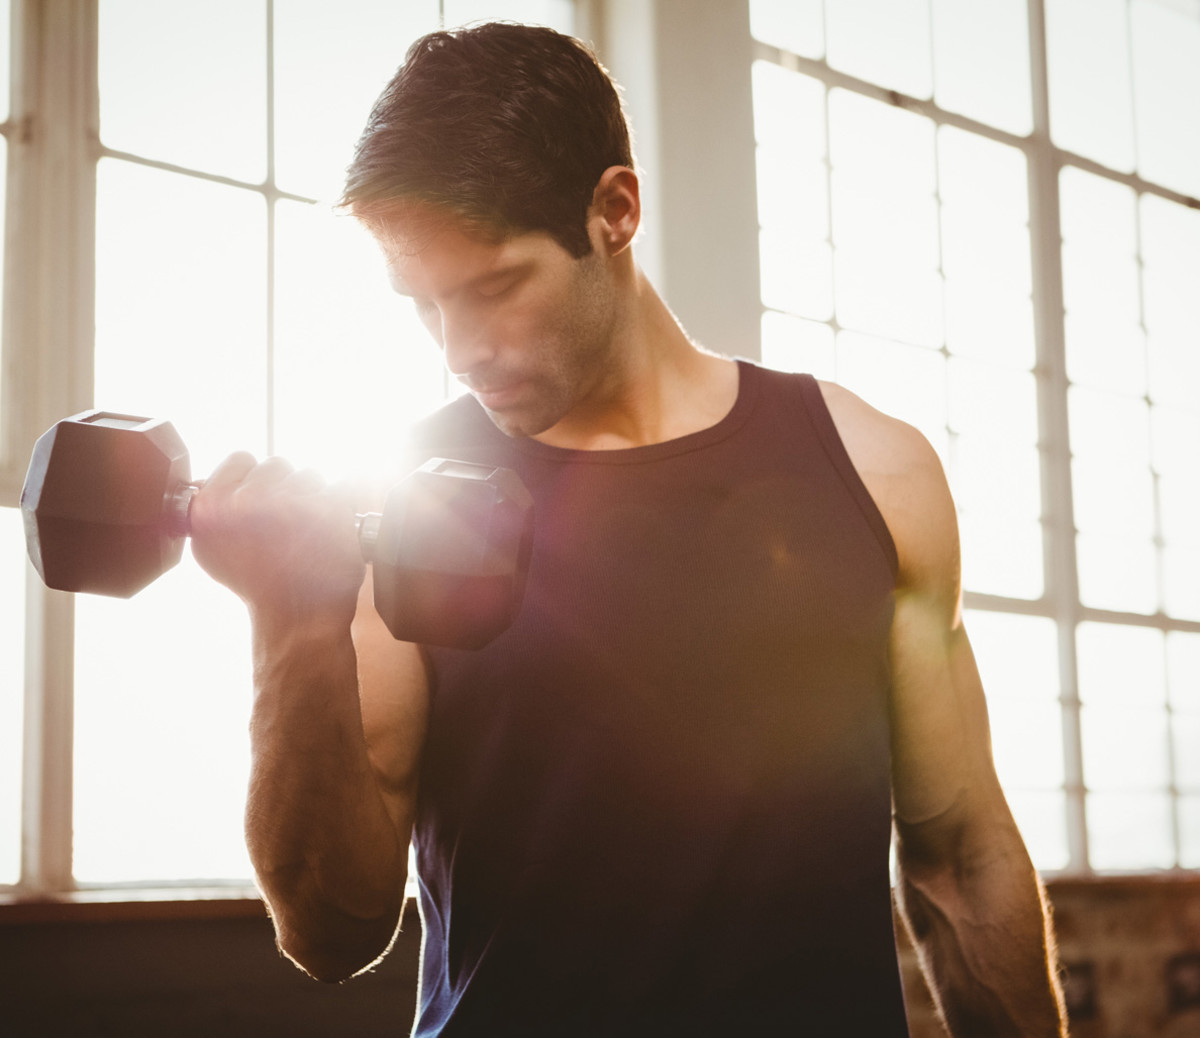 7 Amateur Arm Training Moves That Will Prevent Your Biceps From